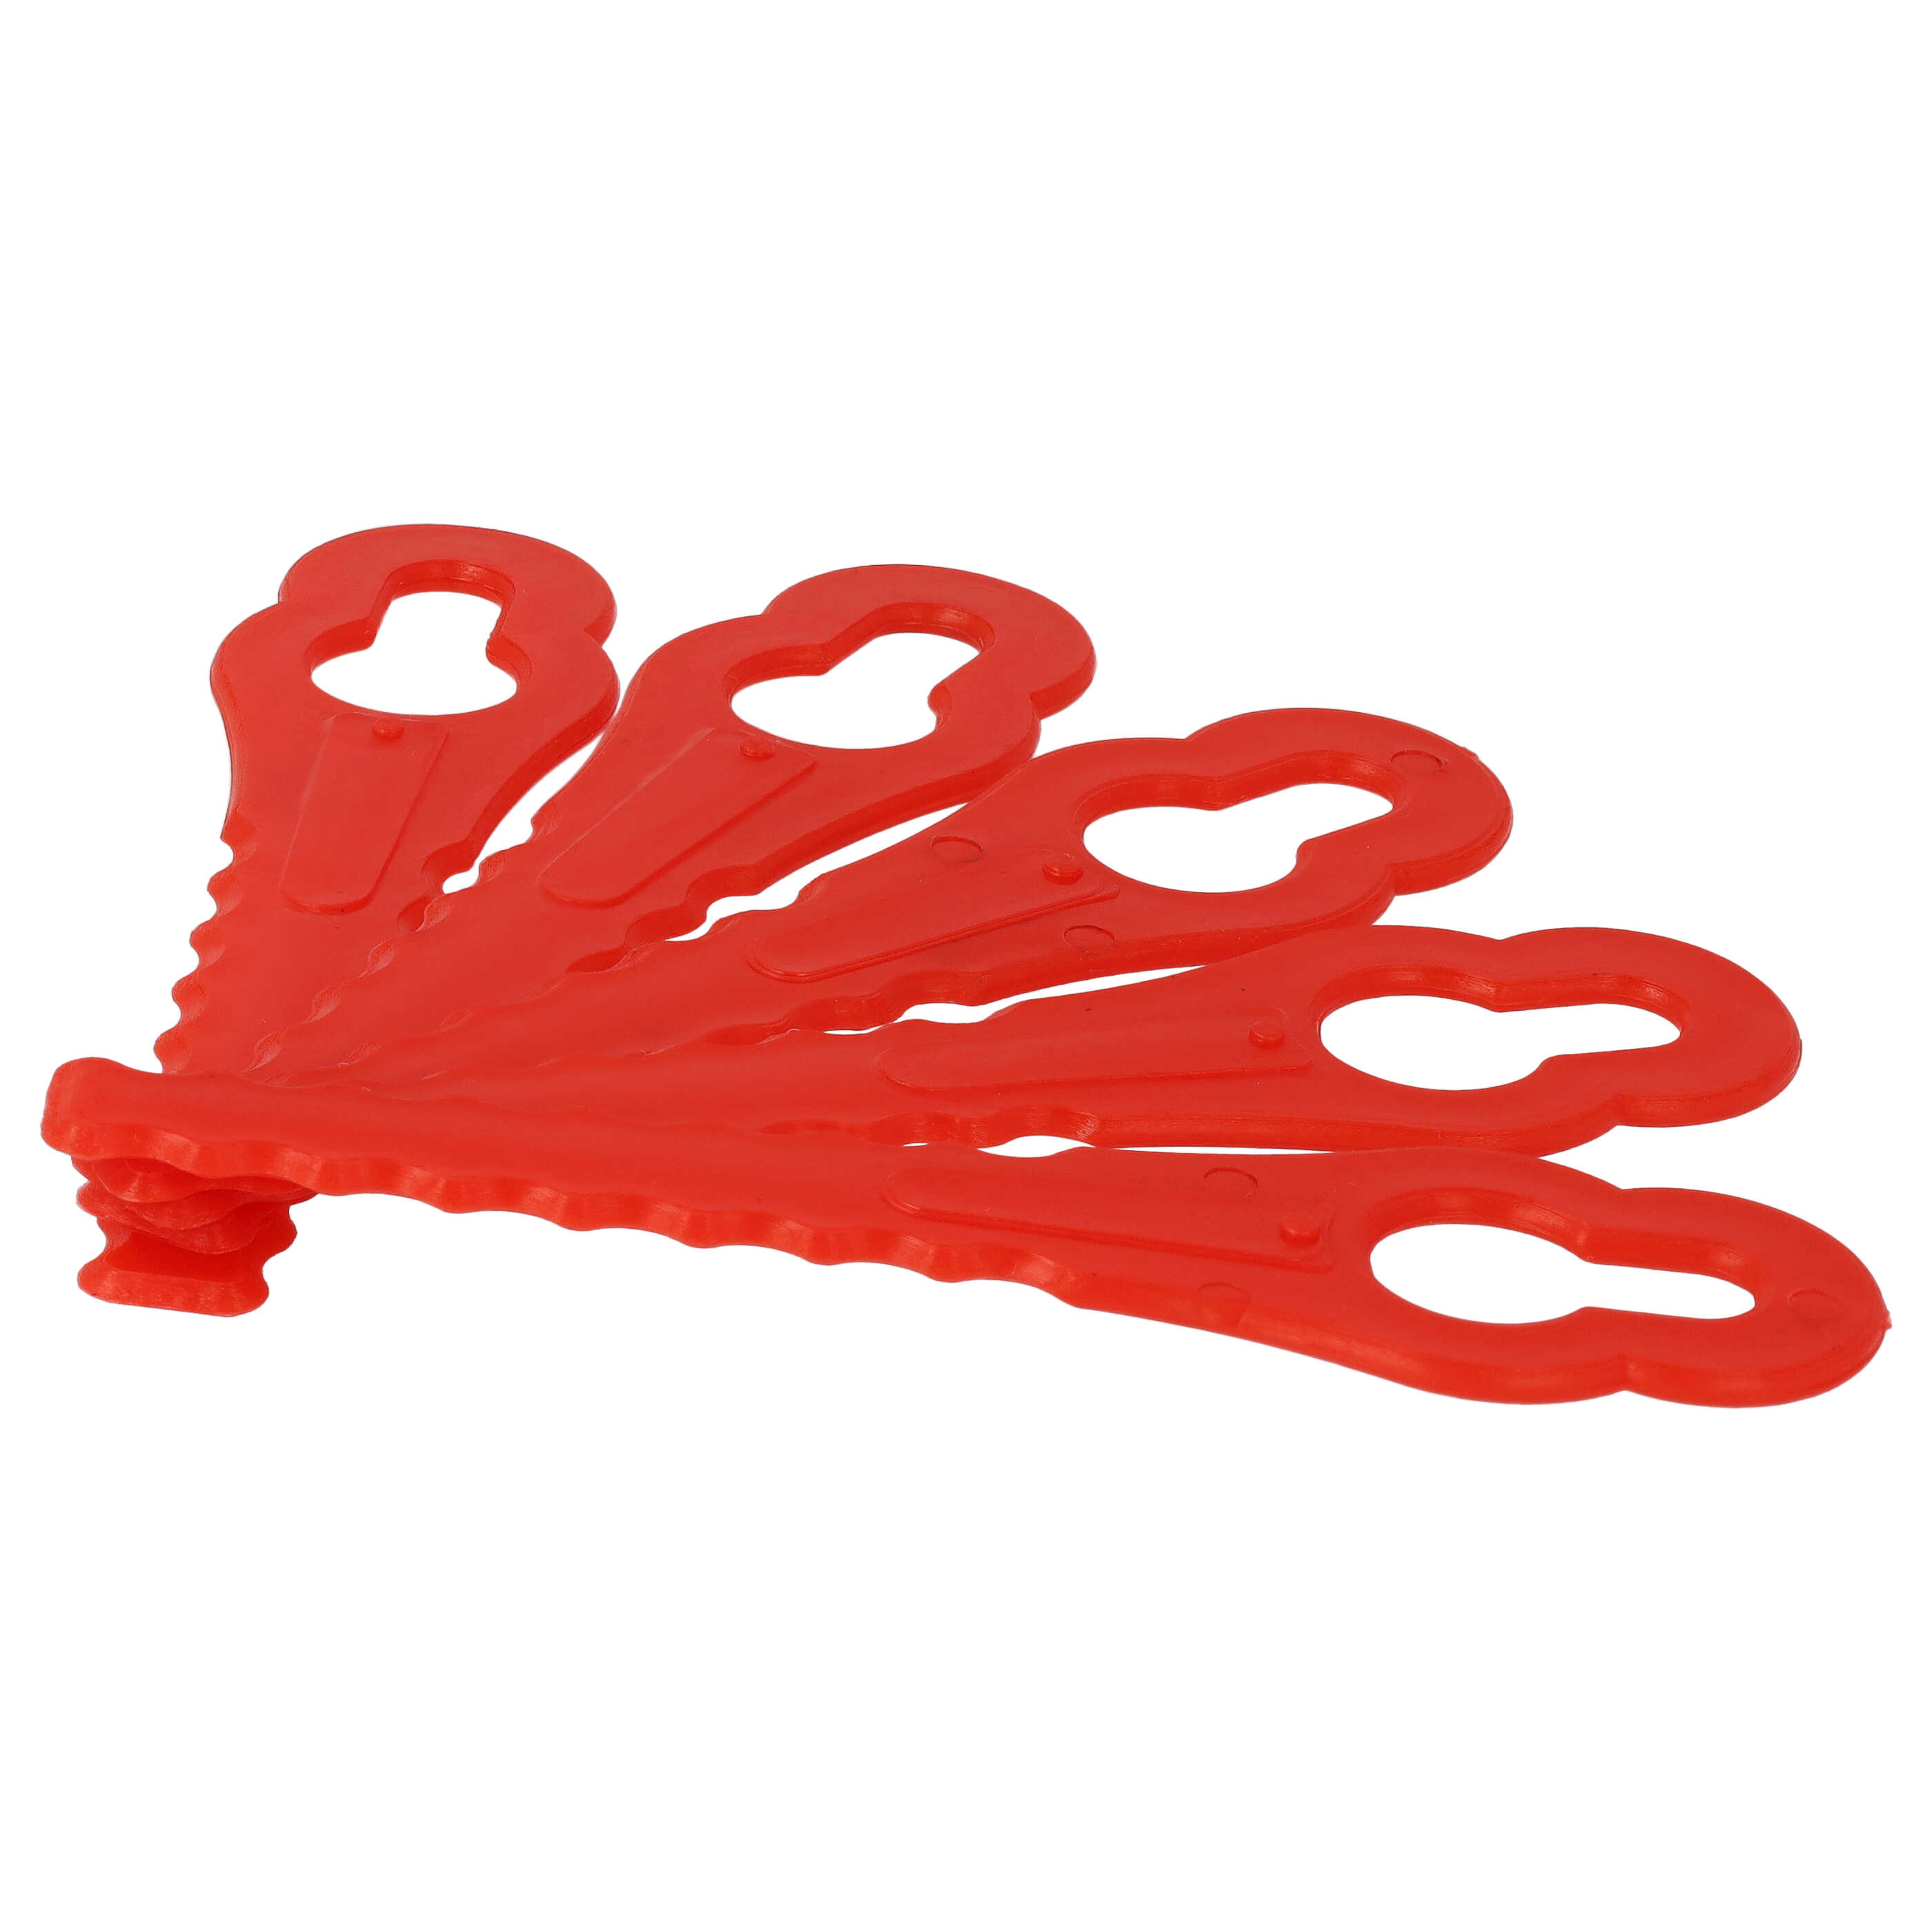 20x Exchange Blade replaces Güde 58586 for Cordless Strimmer - plastic, red